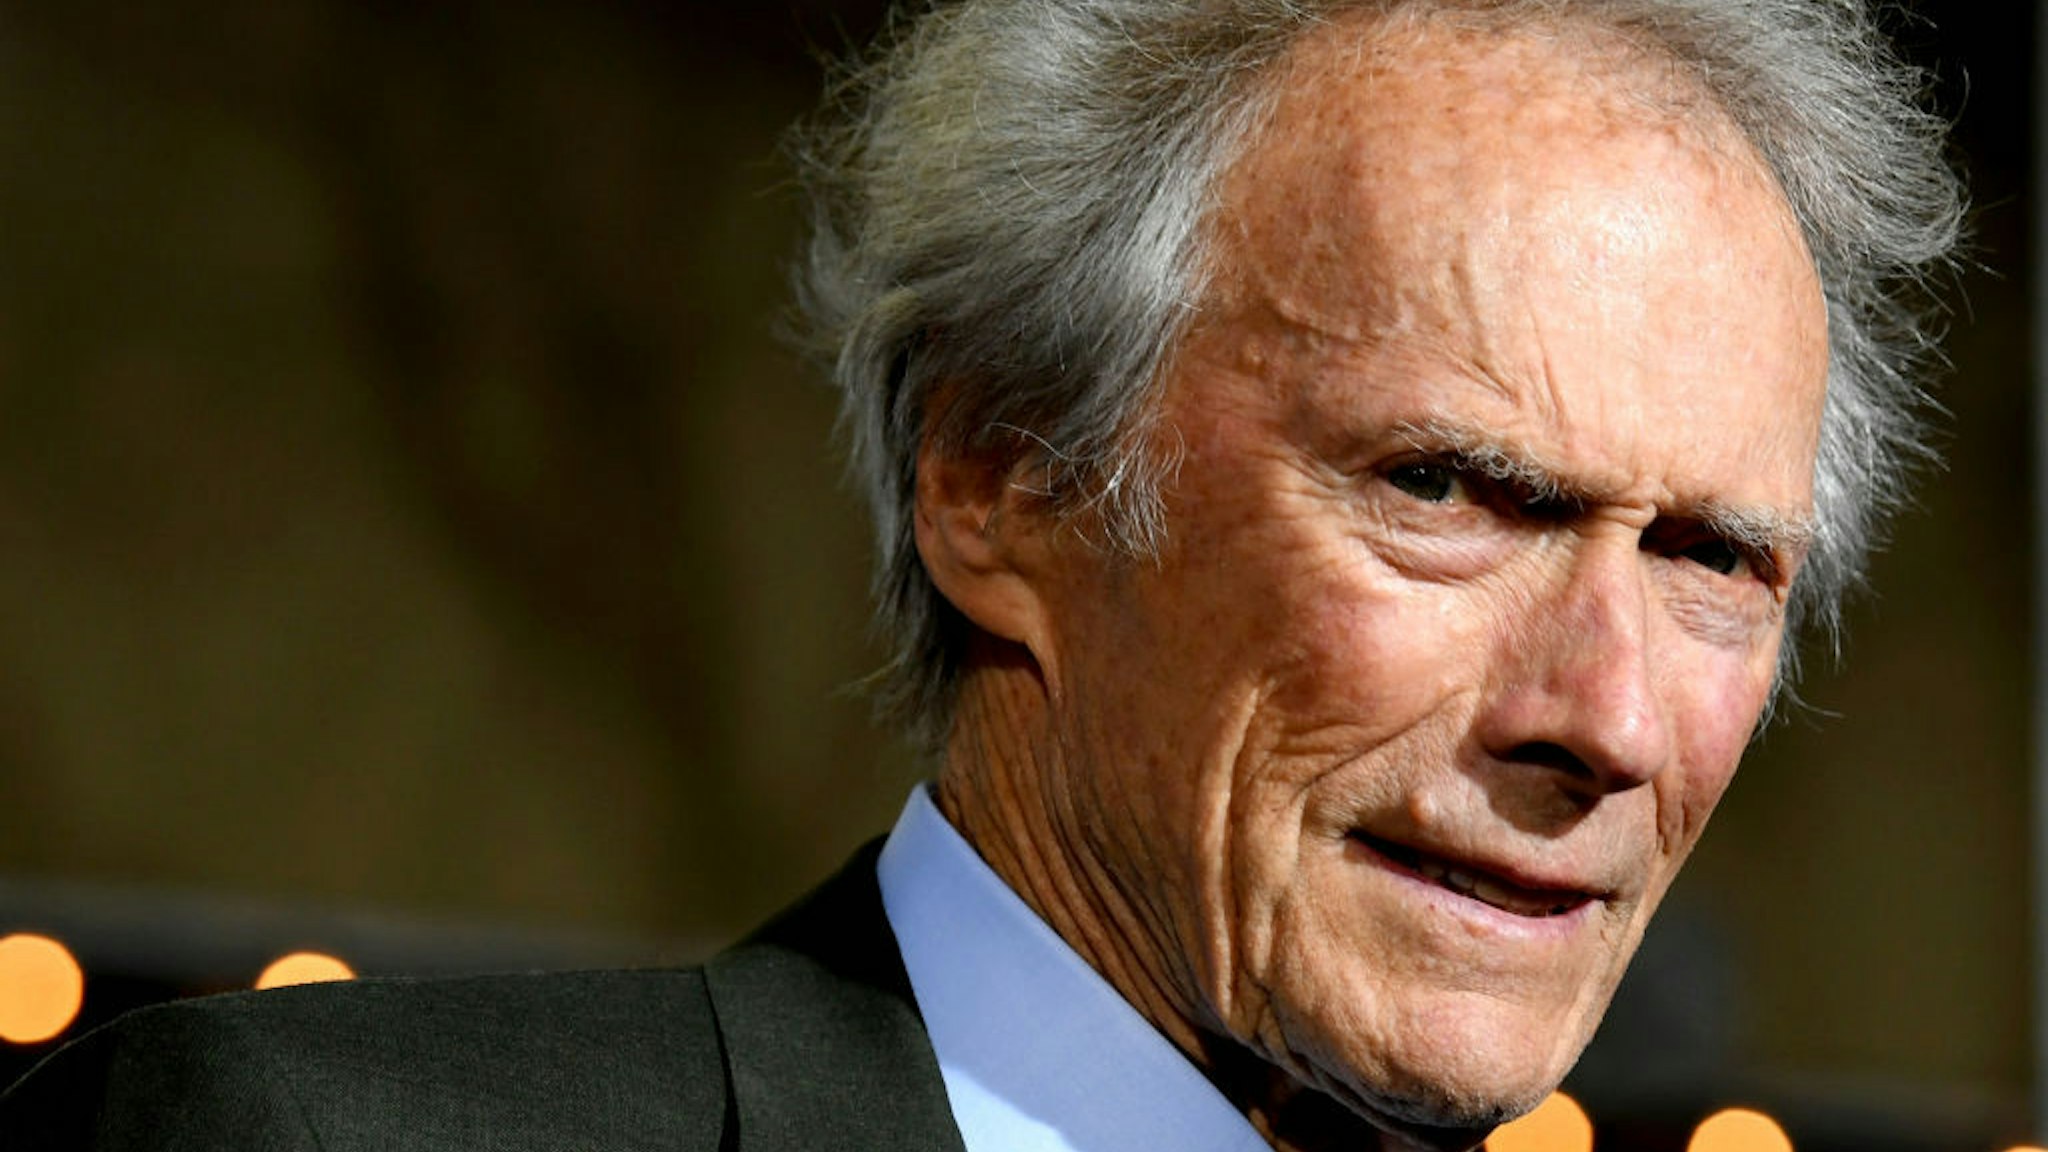 Clint Eastwood arrives at the premiere of Warner Bros. Pictures' "The Mule" at the Village Theatre on December 10, 2018 in Los Angeles, California. (Photo by Kevin Winter/Getty Images)